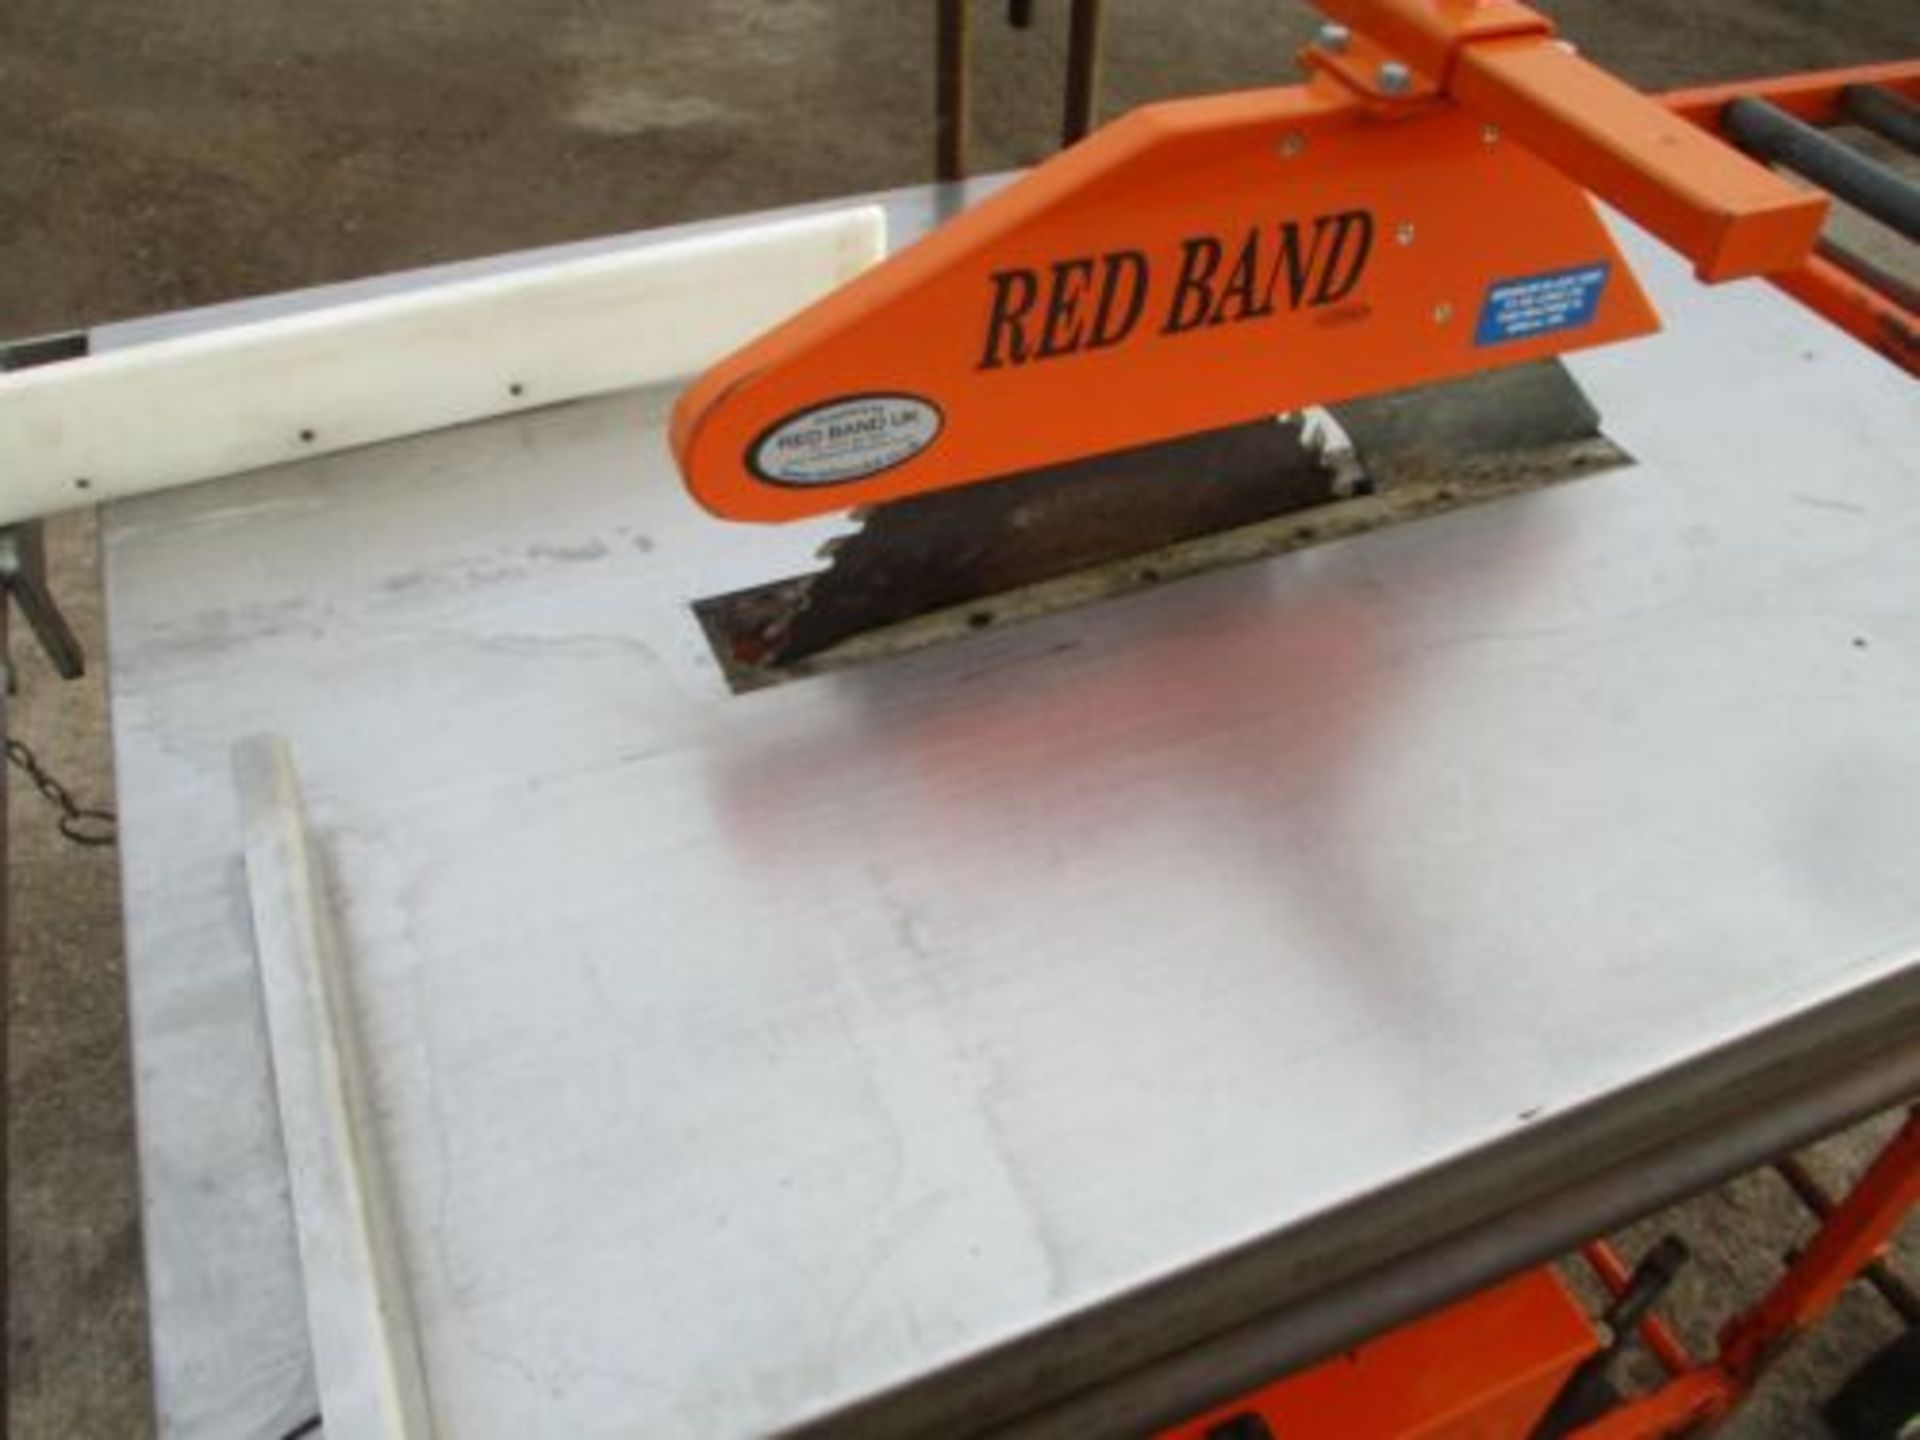 RED BAND WSA400 16" SITE WOOD SAW BENCH HONDA DIESEL ELECTRIC START DELIVERY - Image 5 of 6